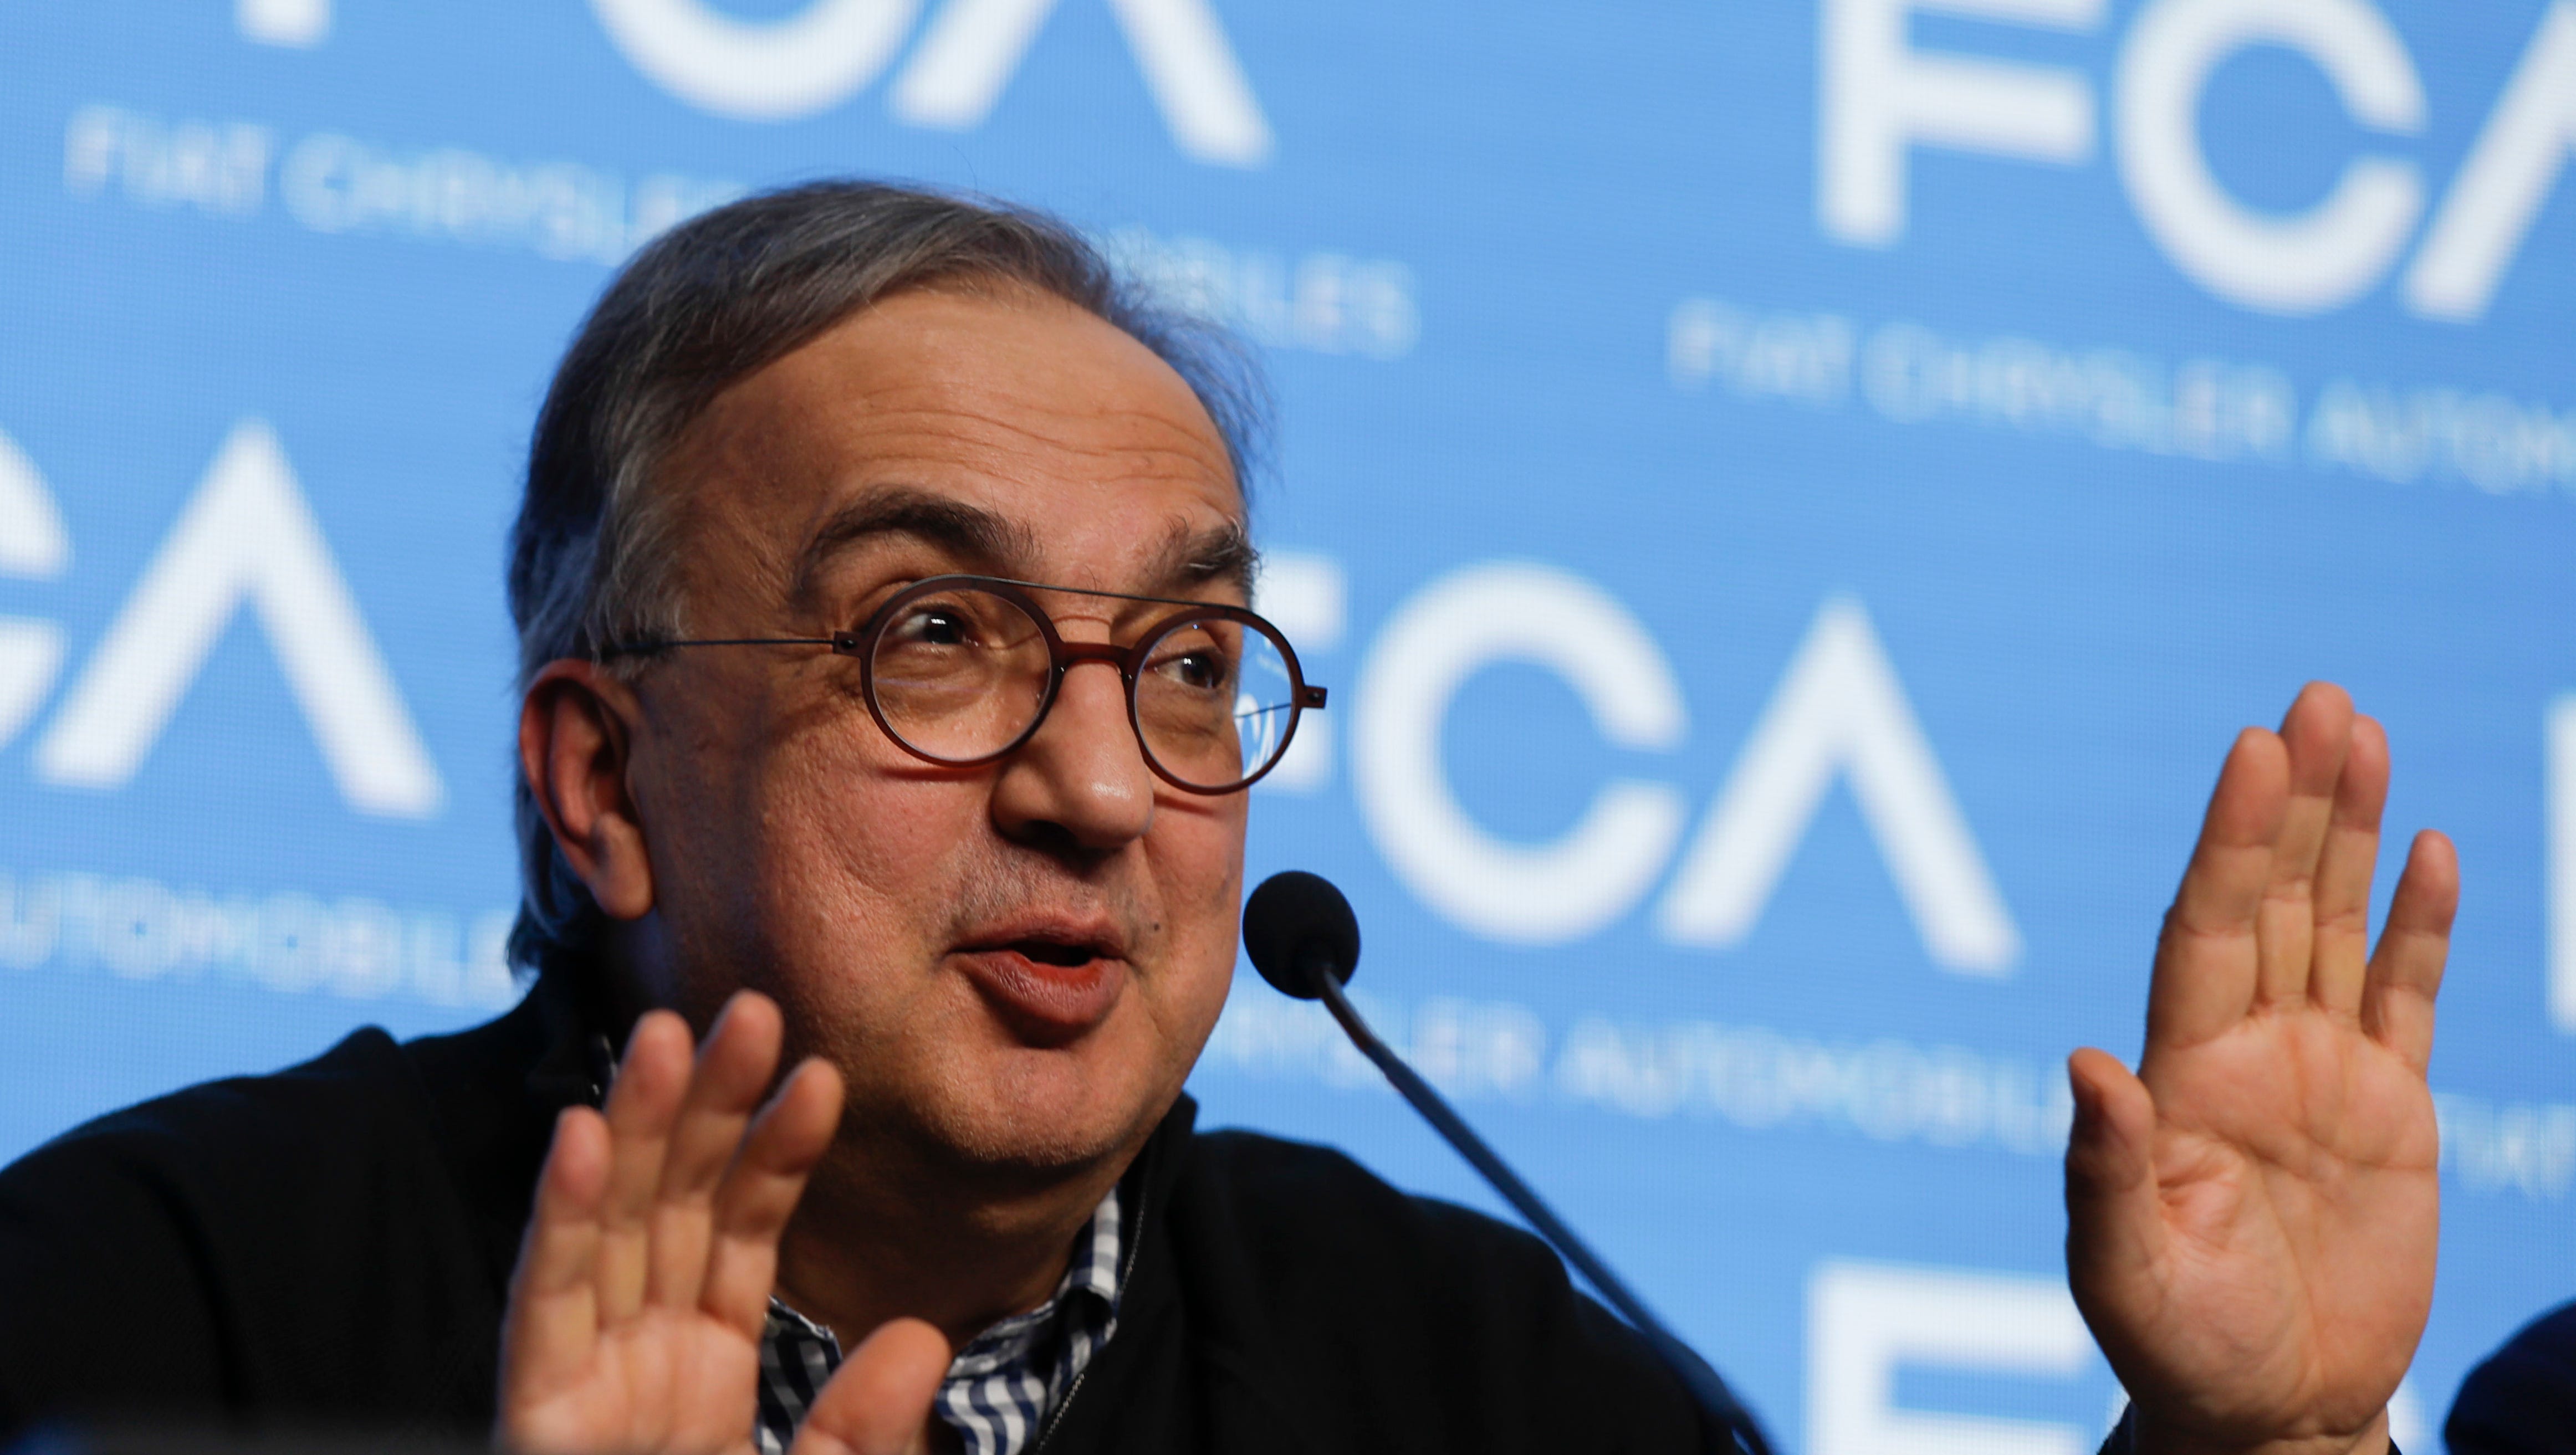 FCA CEO Sergio Marchionne envisions a sweeping transformation of the Italian-American automaker, expected to be delivered long after he retires next April.